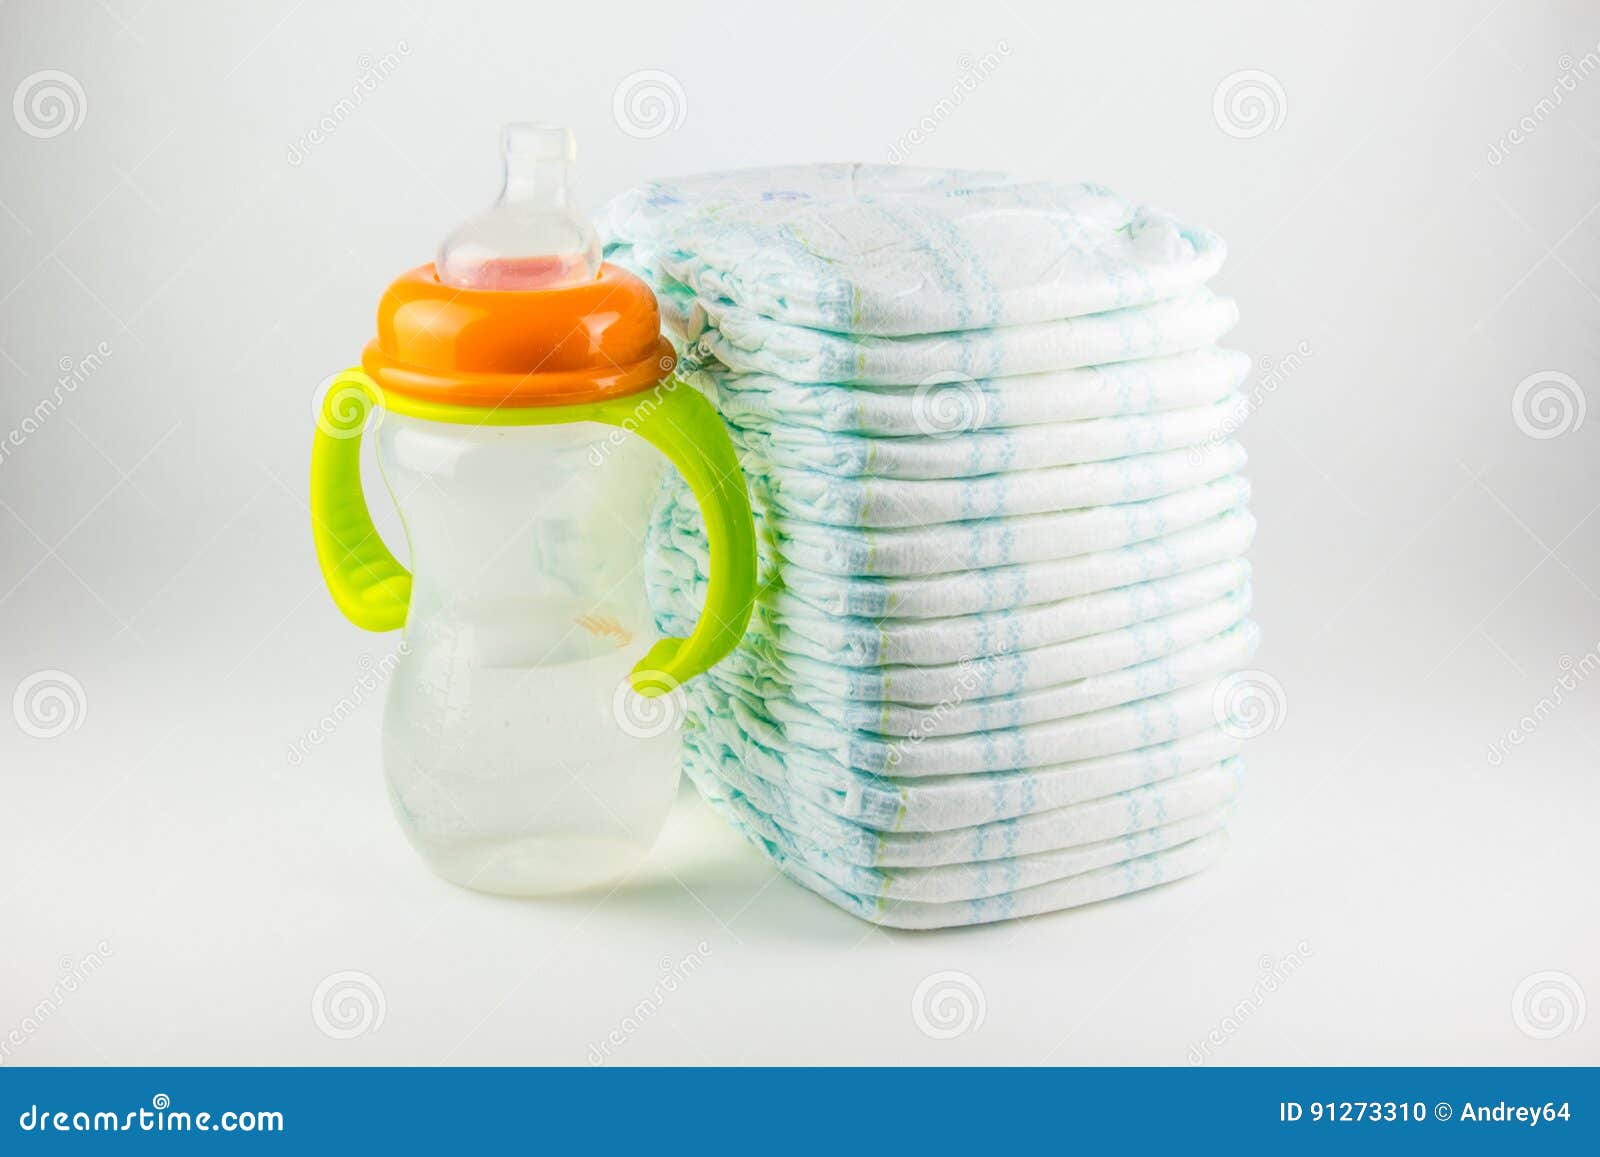 Baby Diapers and Bottle on a White Background Stock Photo - Image of ...